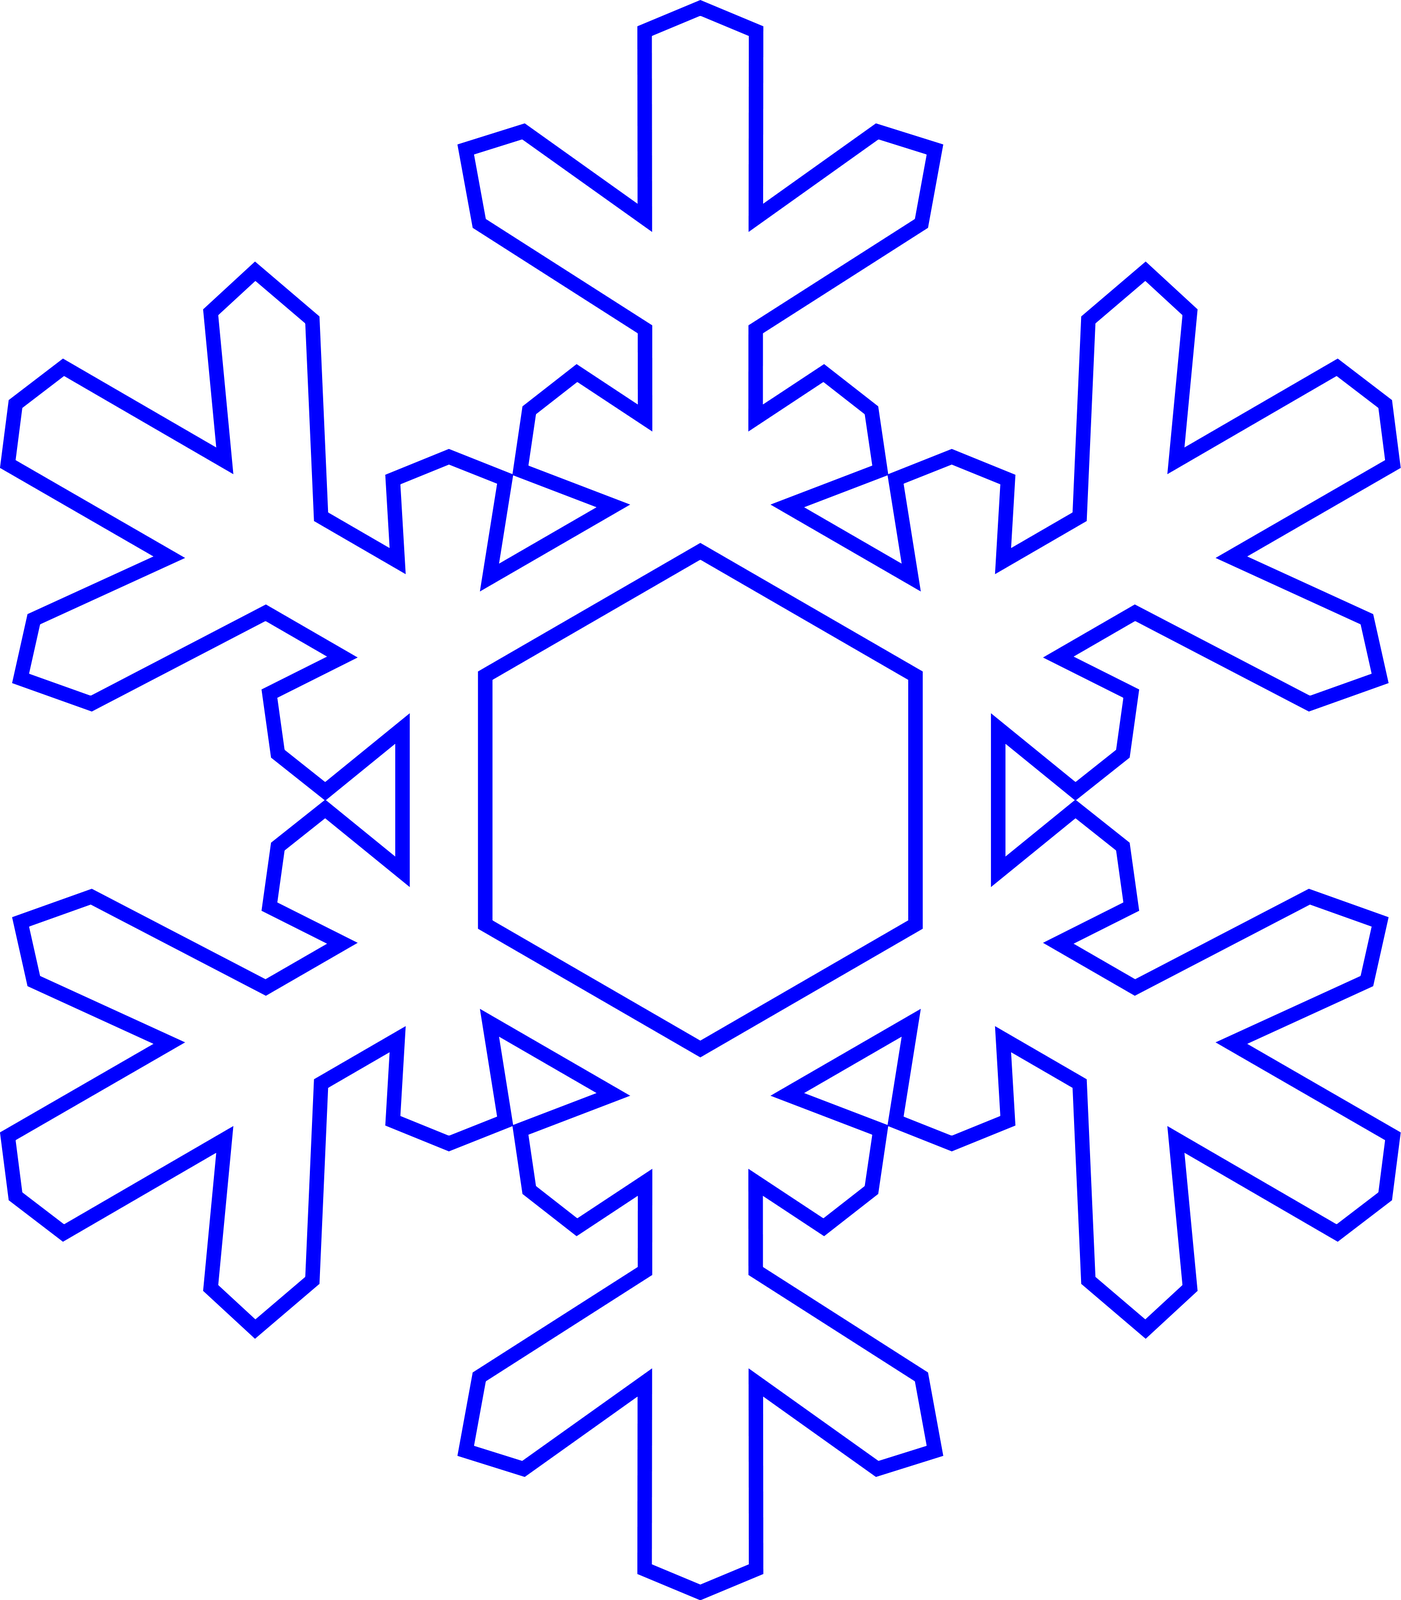 Snowflake Outline - Cliparts.co